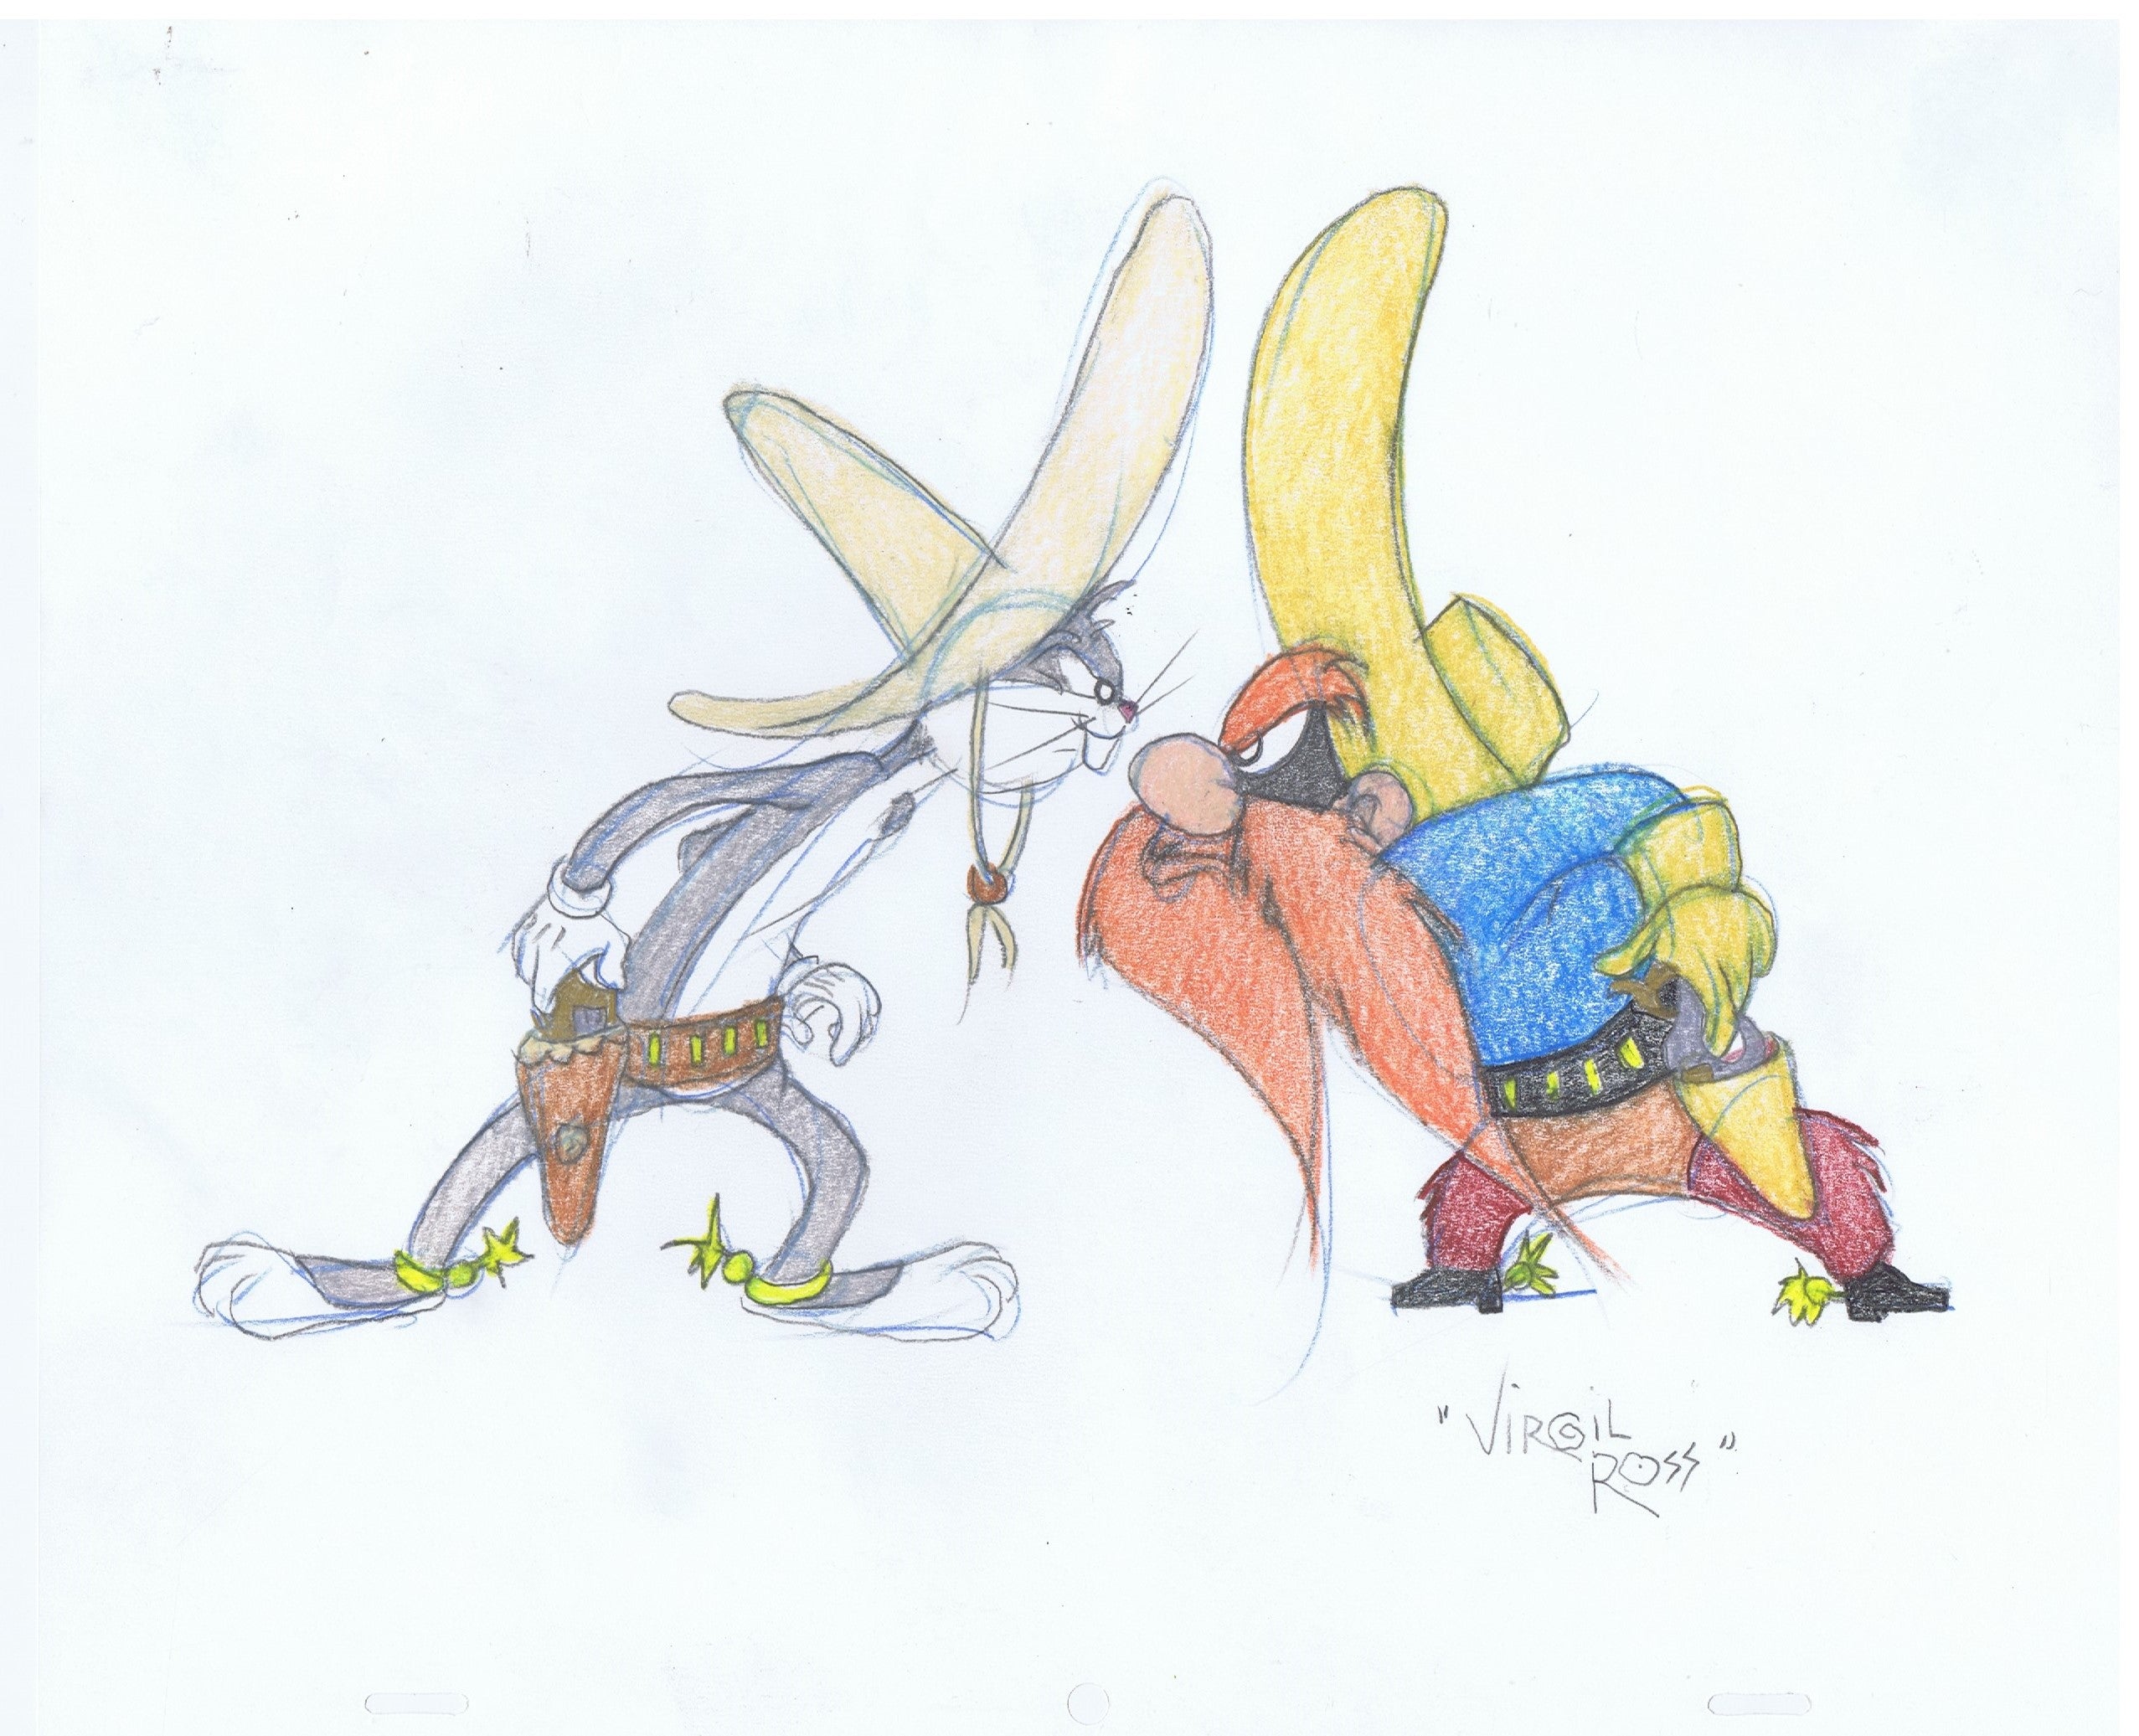 Looney Tunes Original Production Cel with Matching Drawing: Speedy